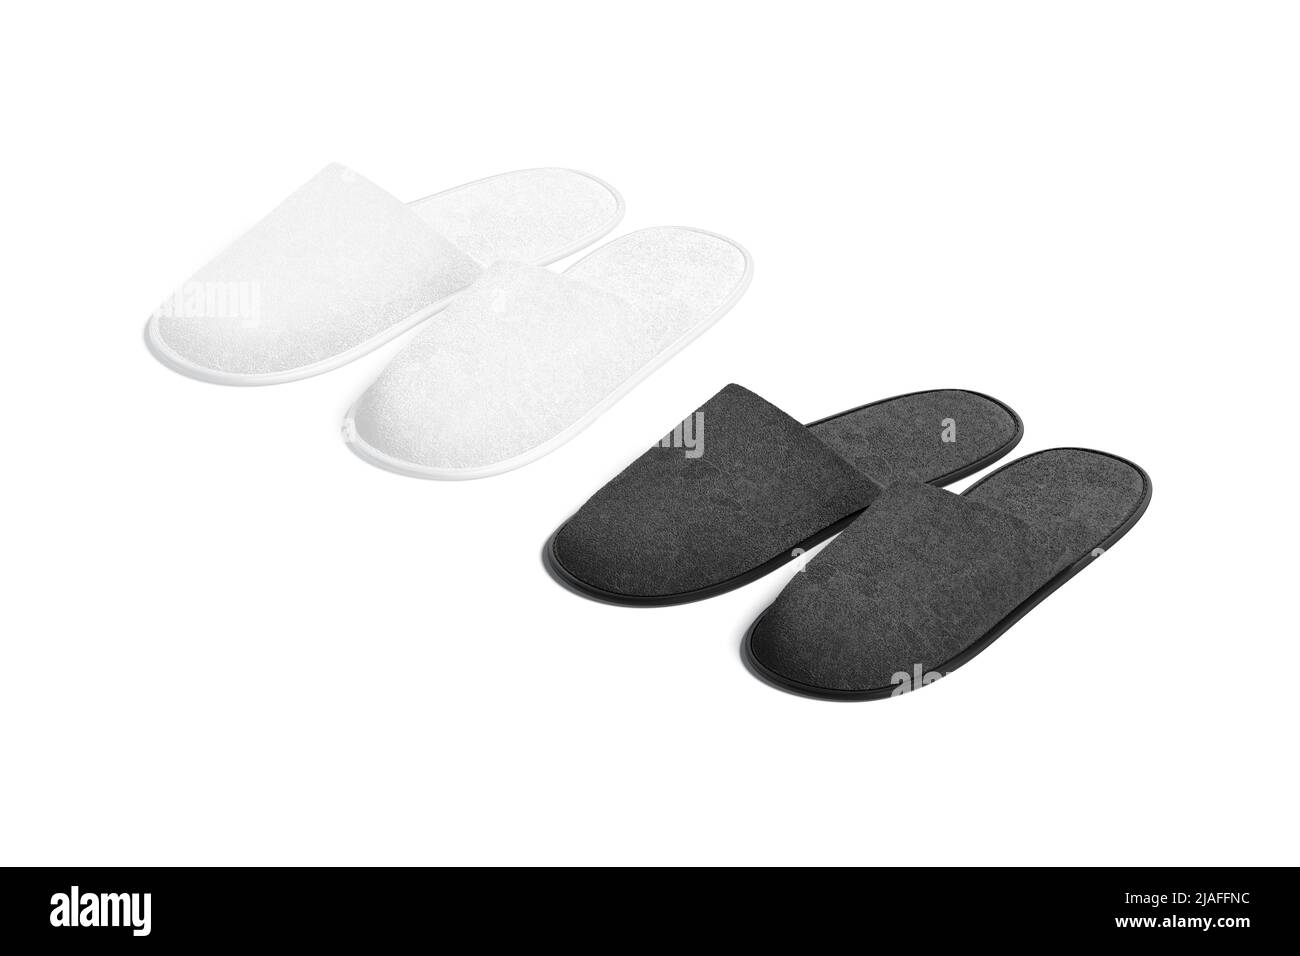 Blank black and white home slippers mockup, side view Stock Photo